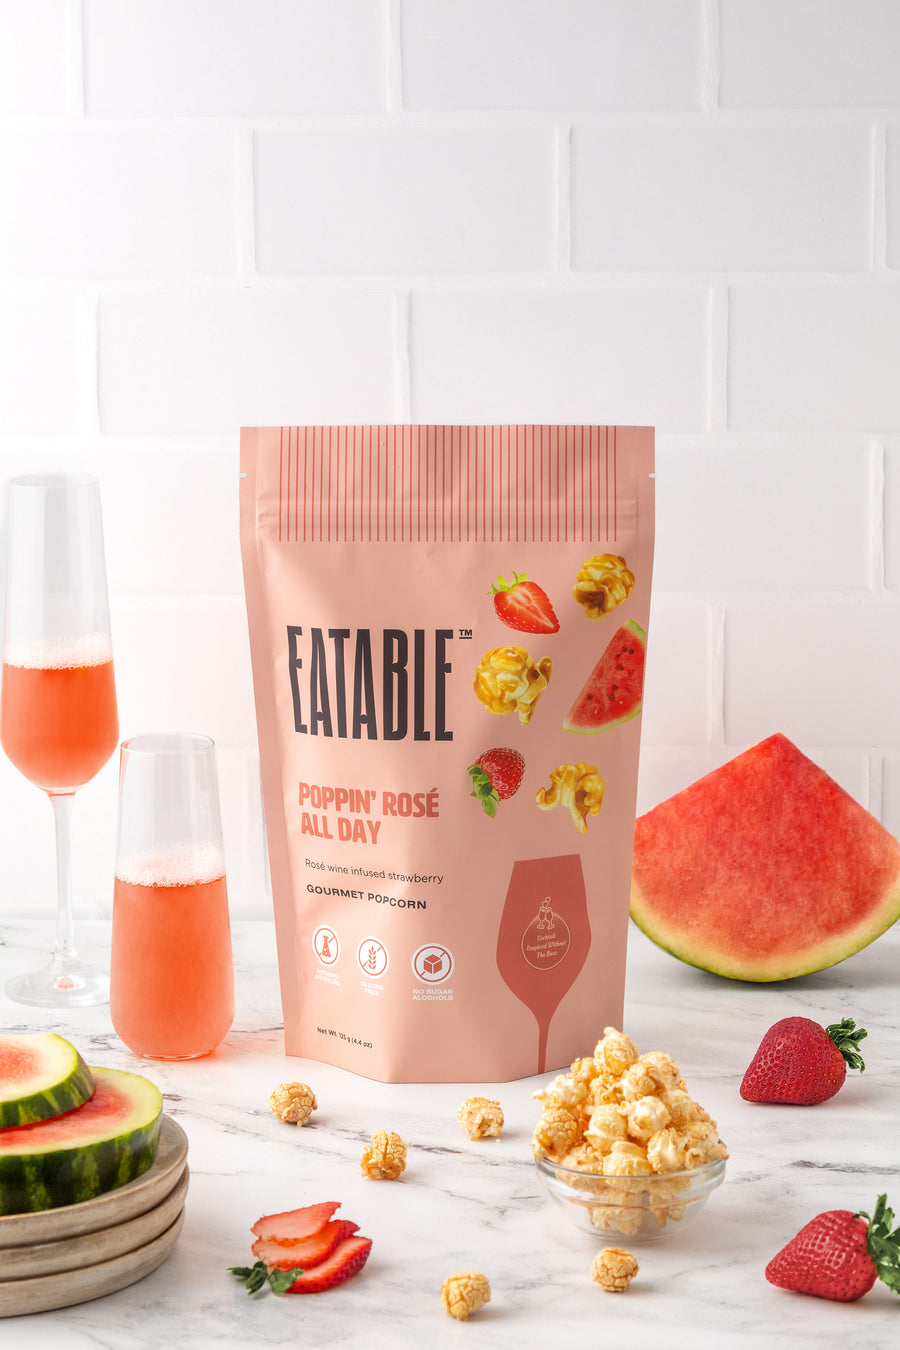 Poppin' Rosé All Day (125 g) - Case of 12 - EATABLE Popcorn